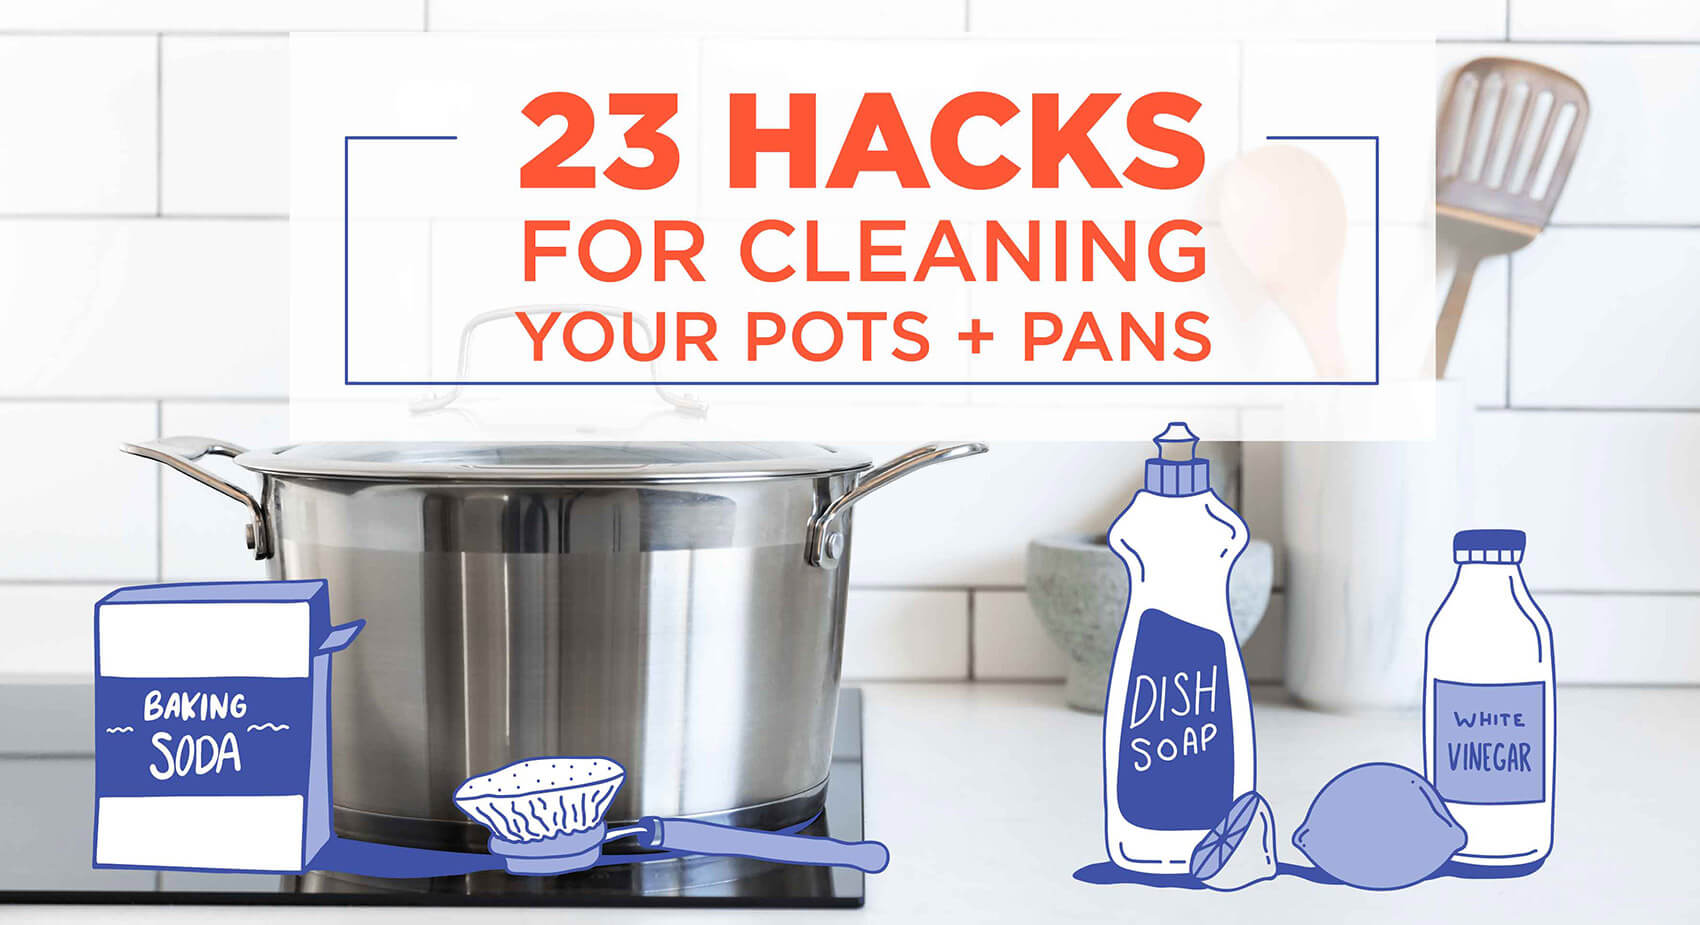 How to clean pots and pans